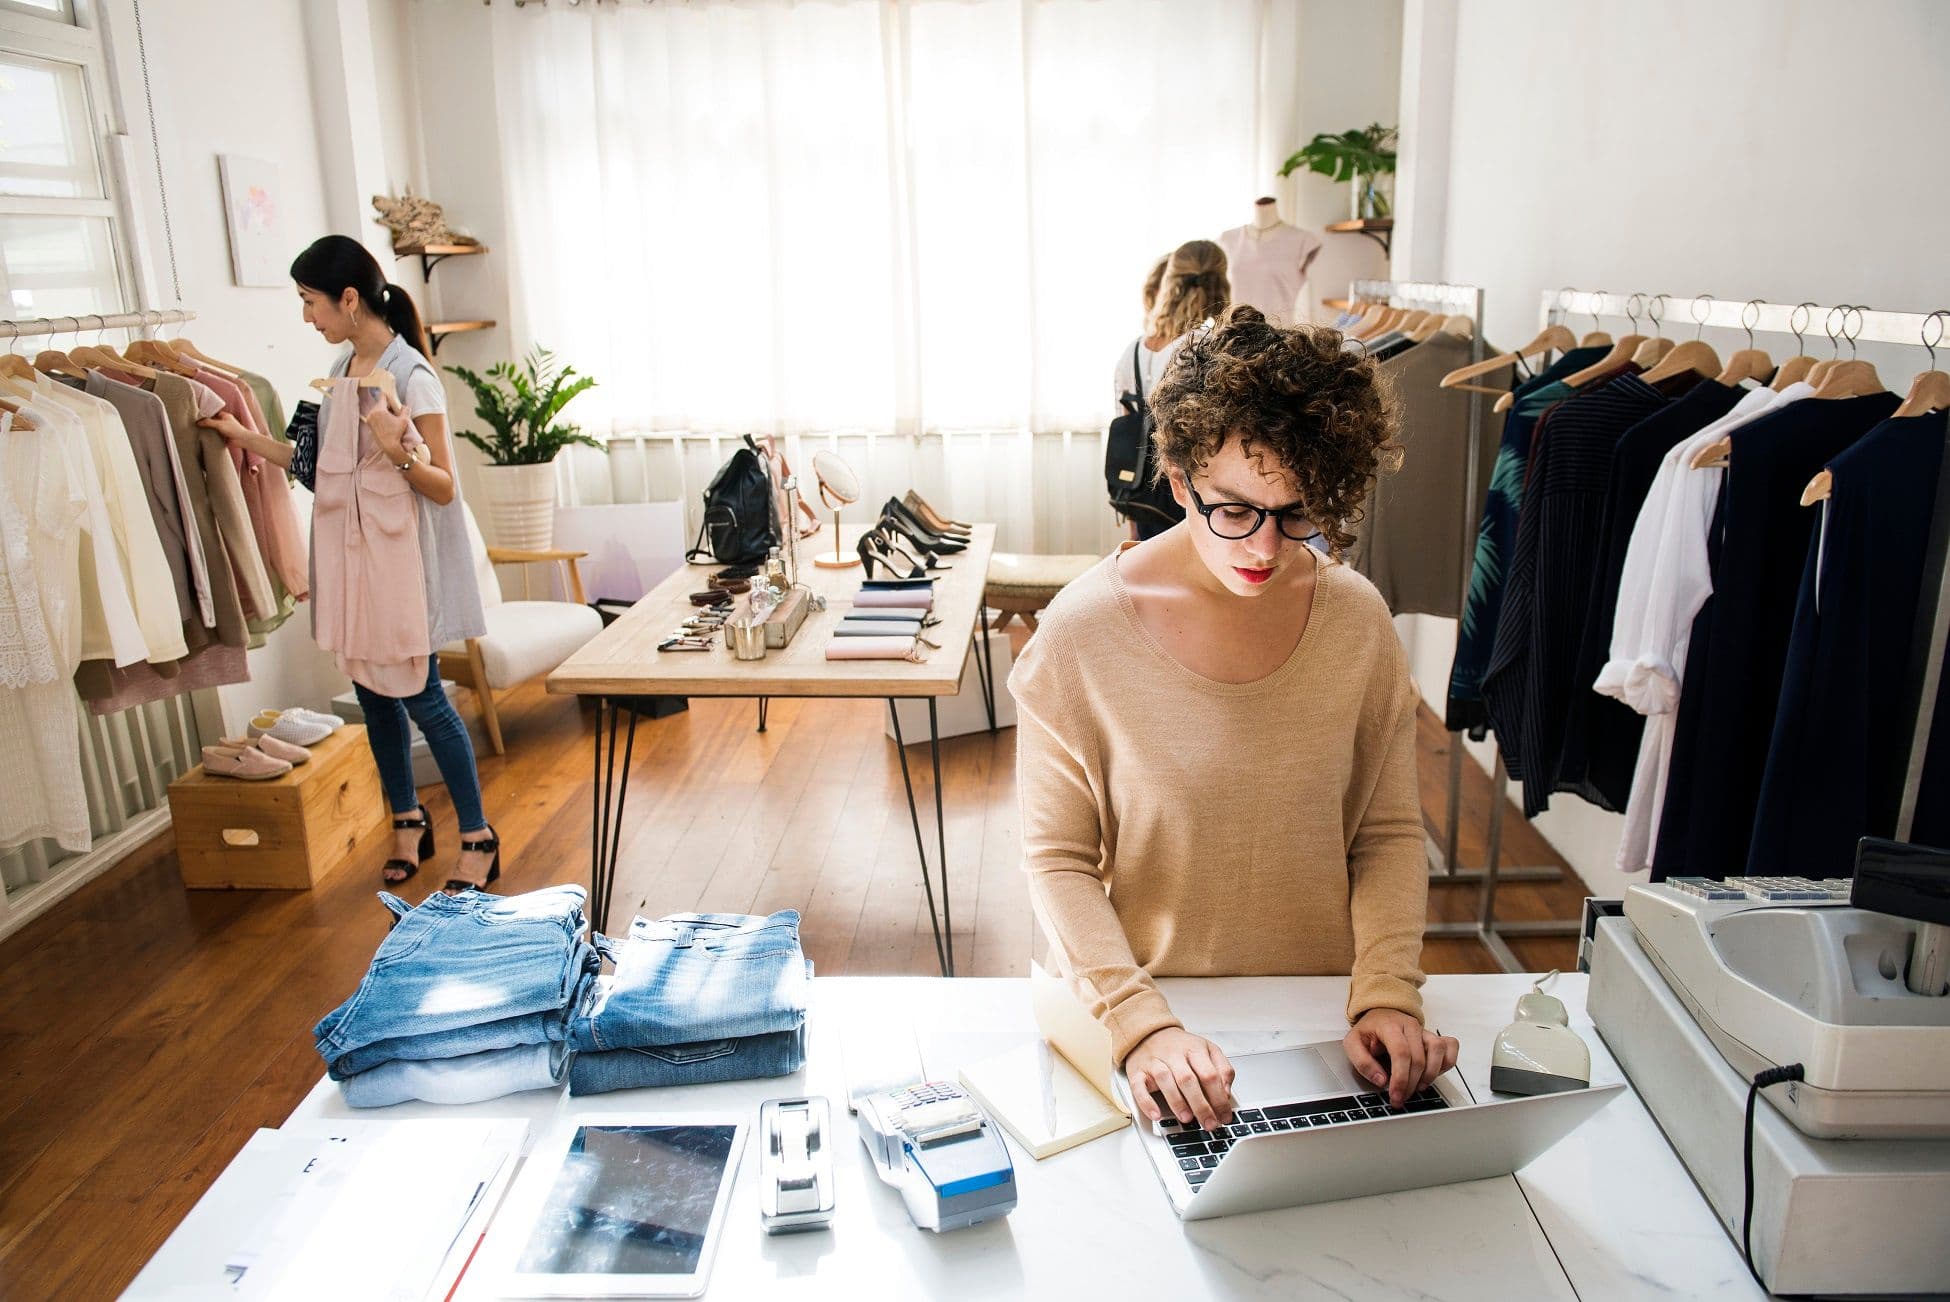 online retailer business loan - the female business owner is using a laptop for online business